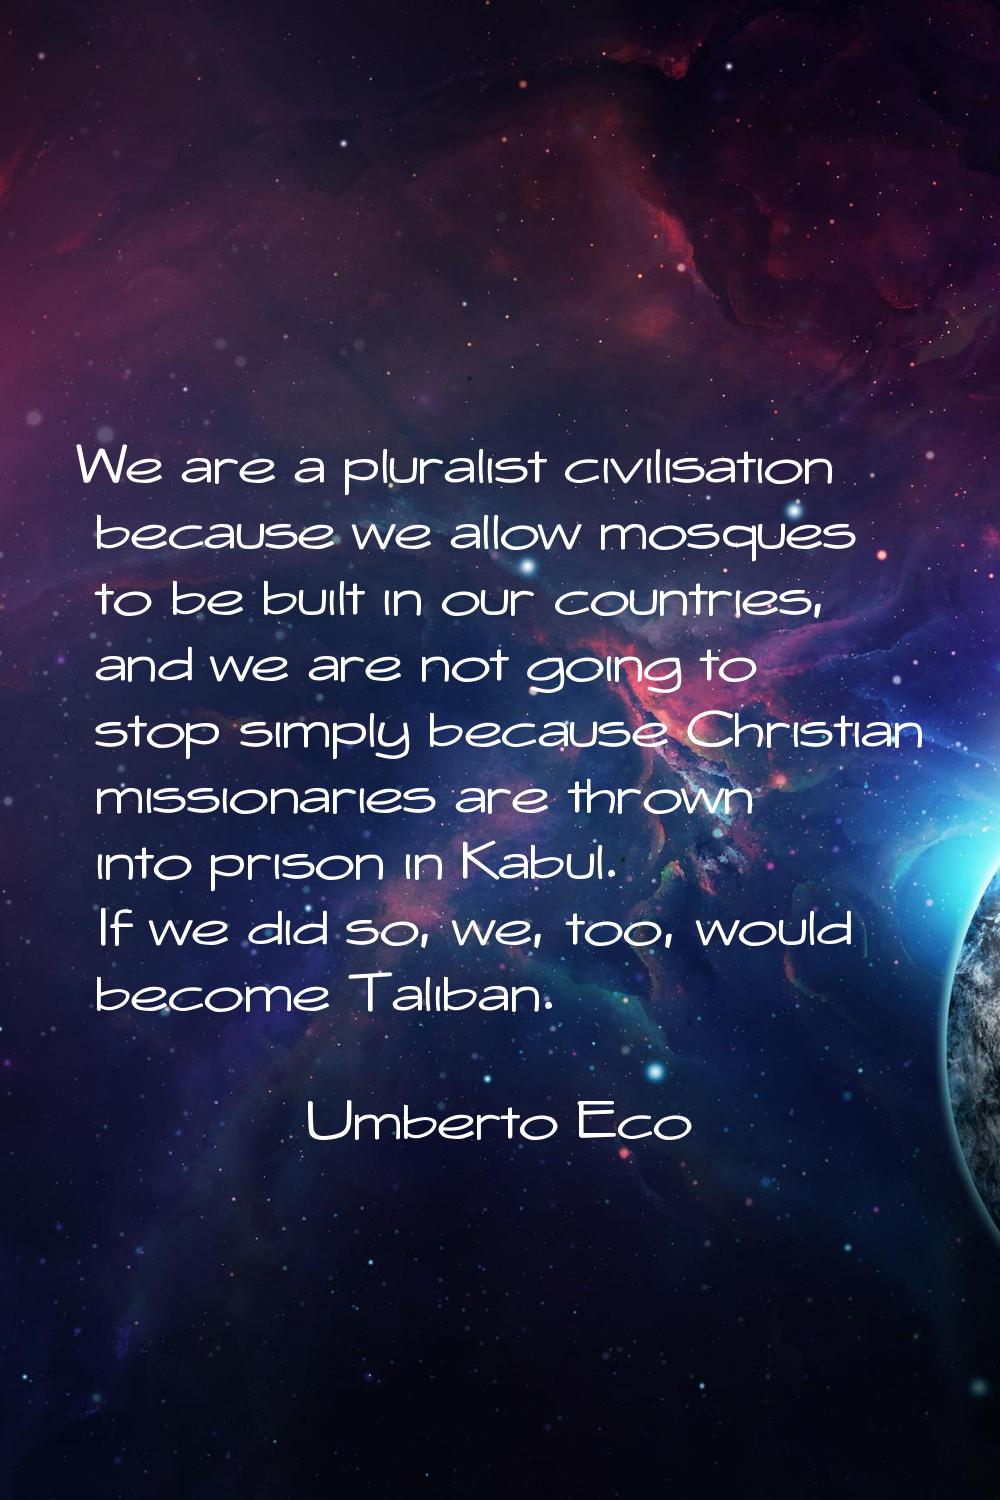 We are a pluralist civilisation because we allow mosques to be built in our countries, and we are n